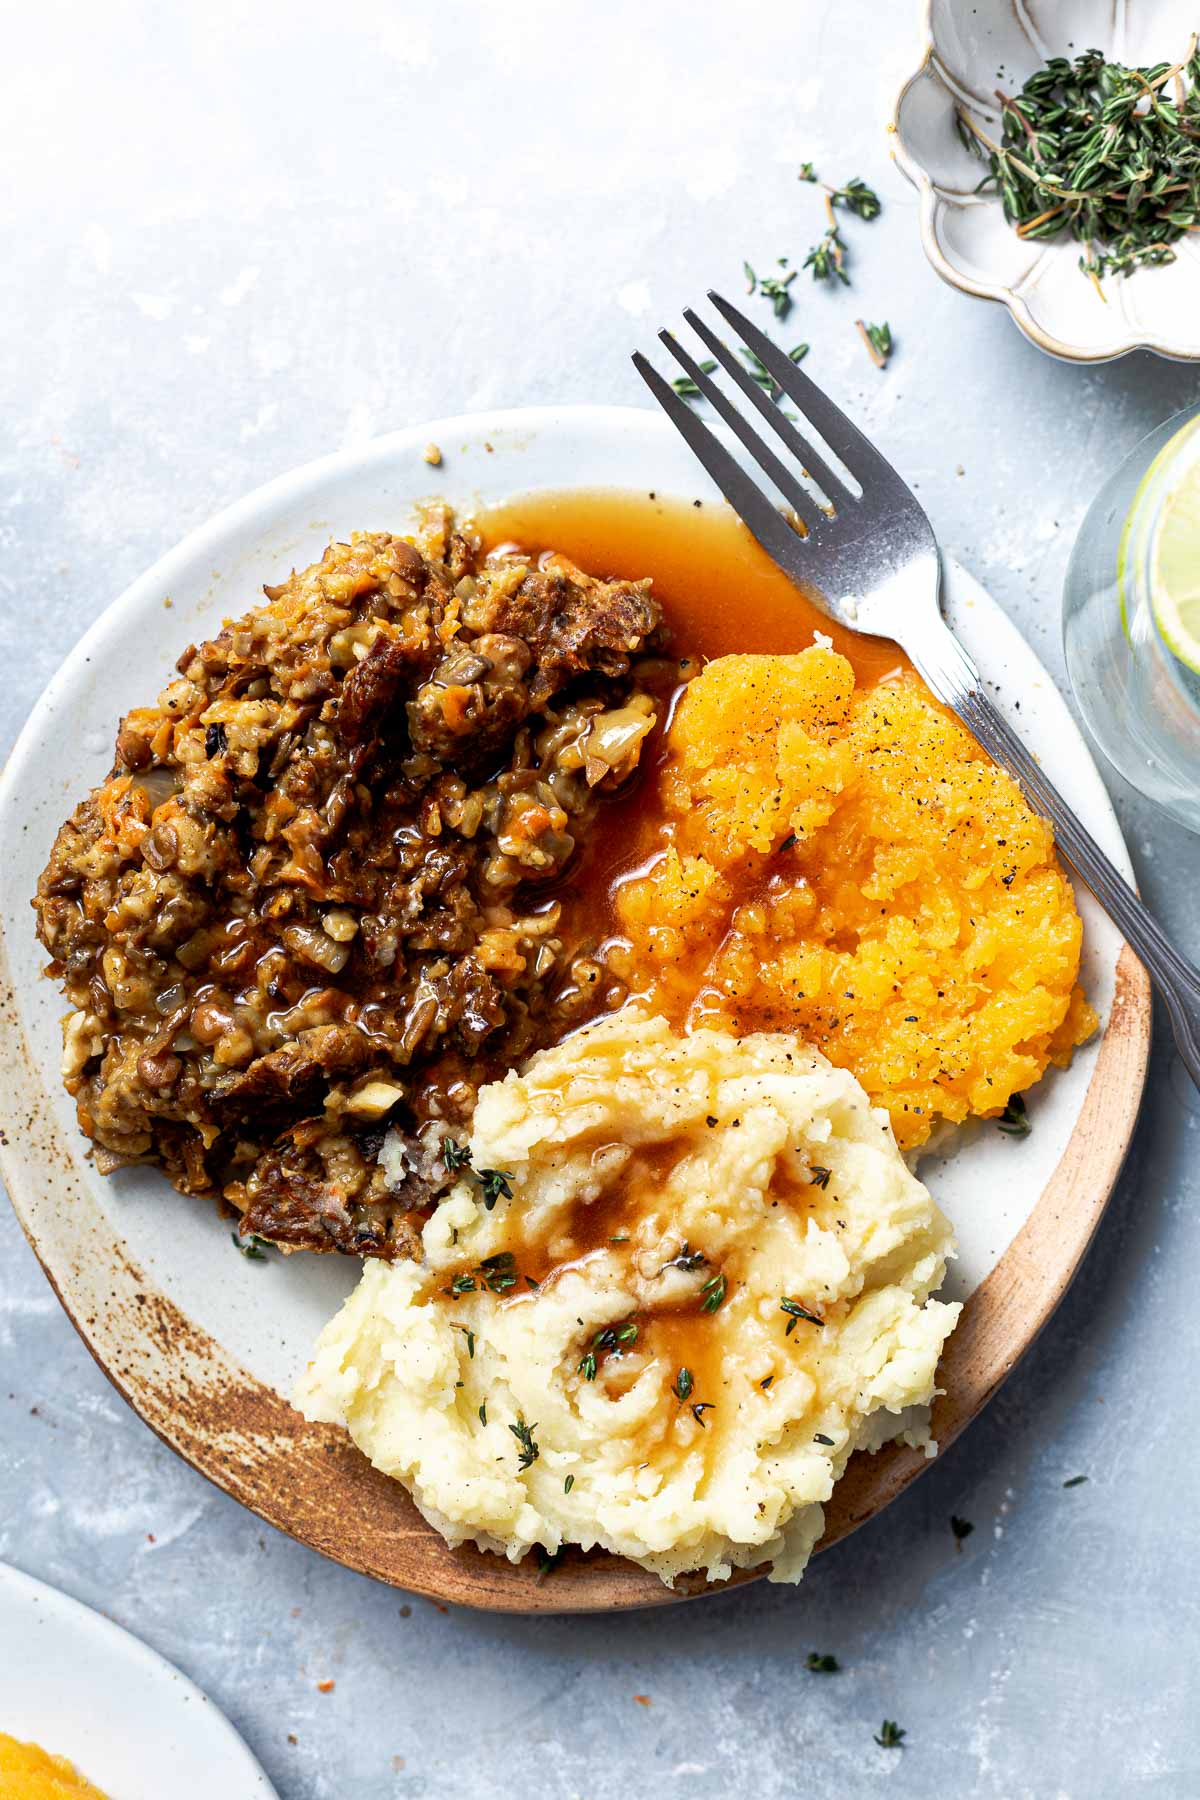 A plate featuring haggis, mashed potato, and mashed turnip with gravy.